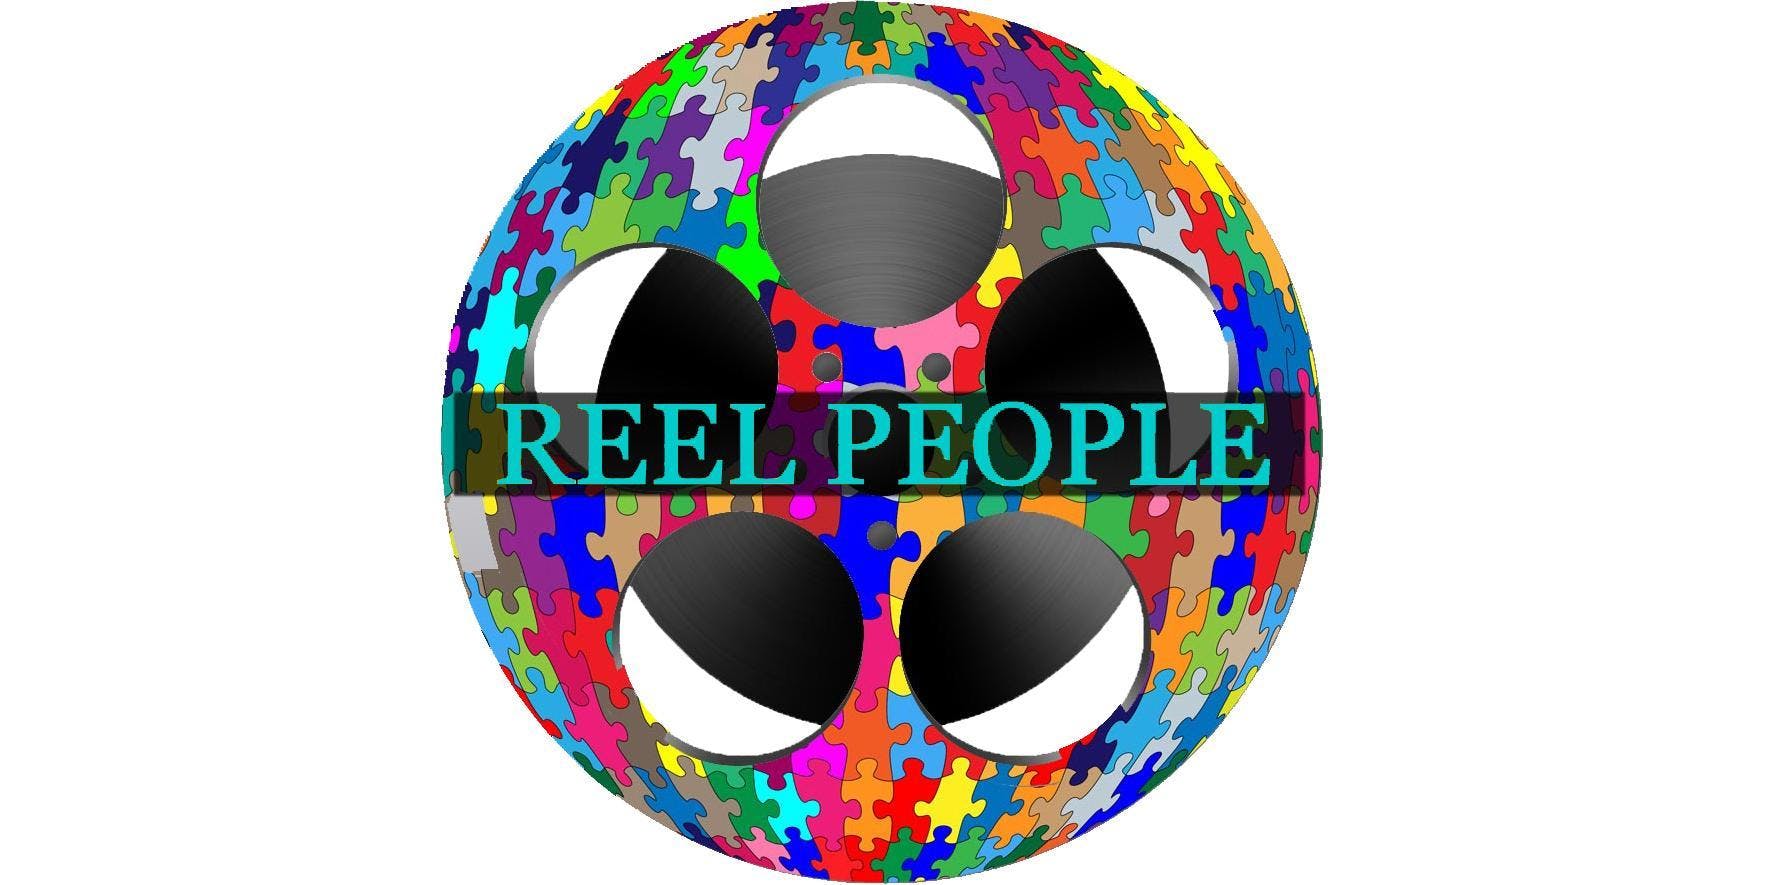 REEL PEOPLE (501c3)..Training & Placement Assistance Behind The Camera in Film & TV, For Our Disabled Veteran Community (info session)